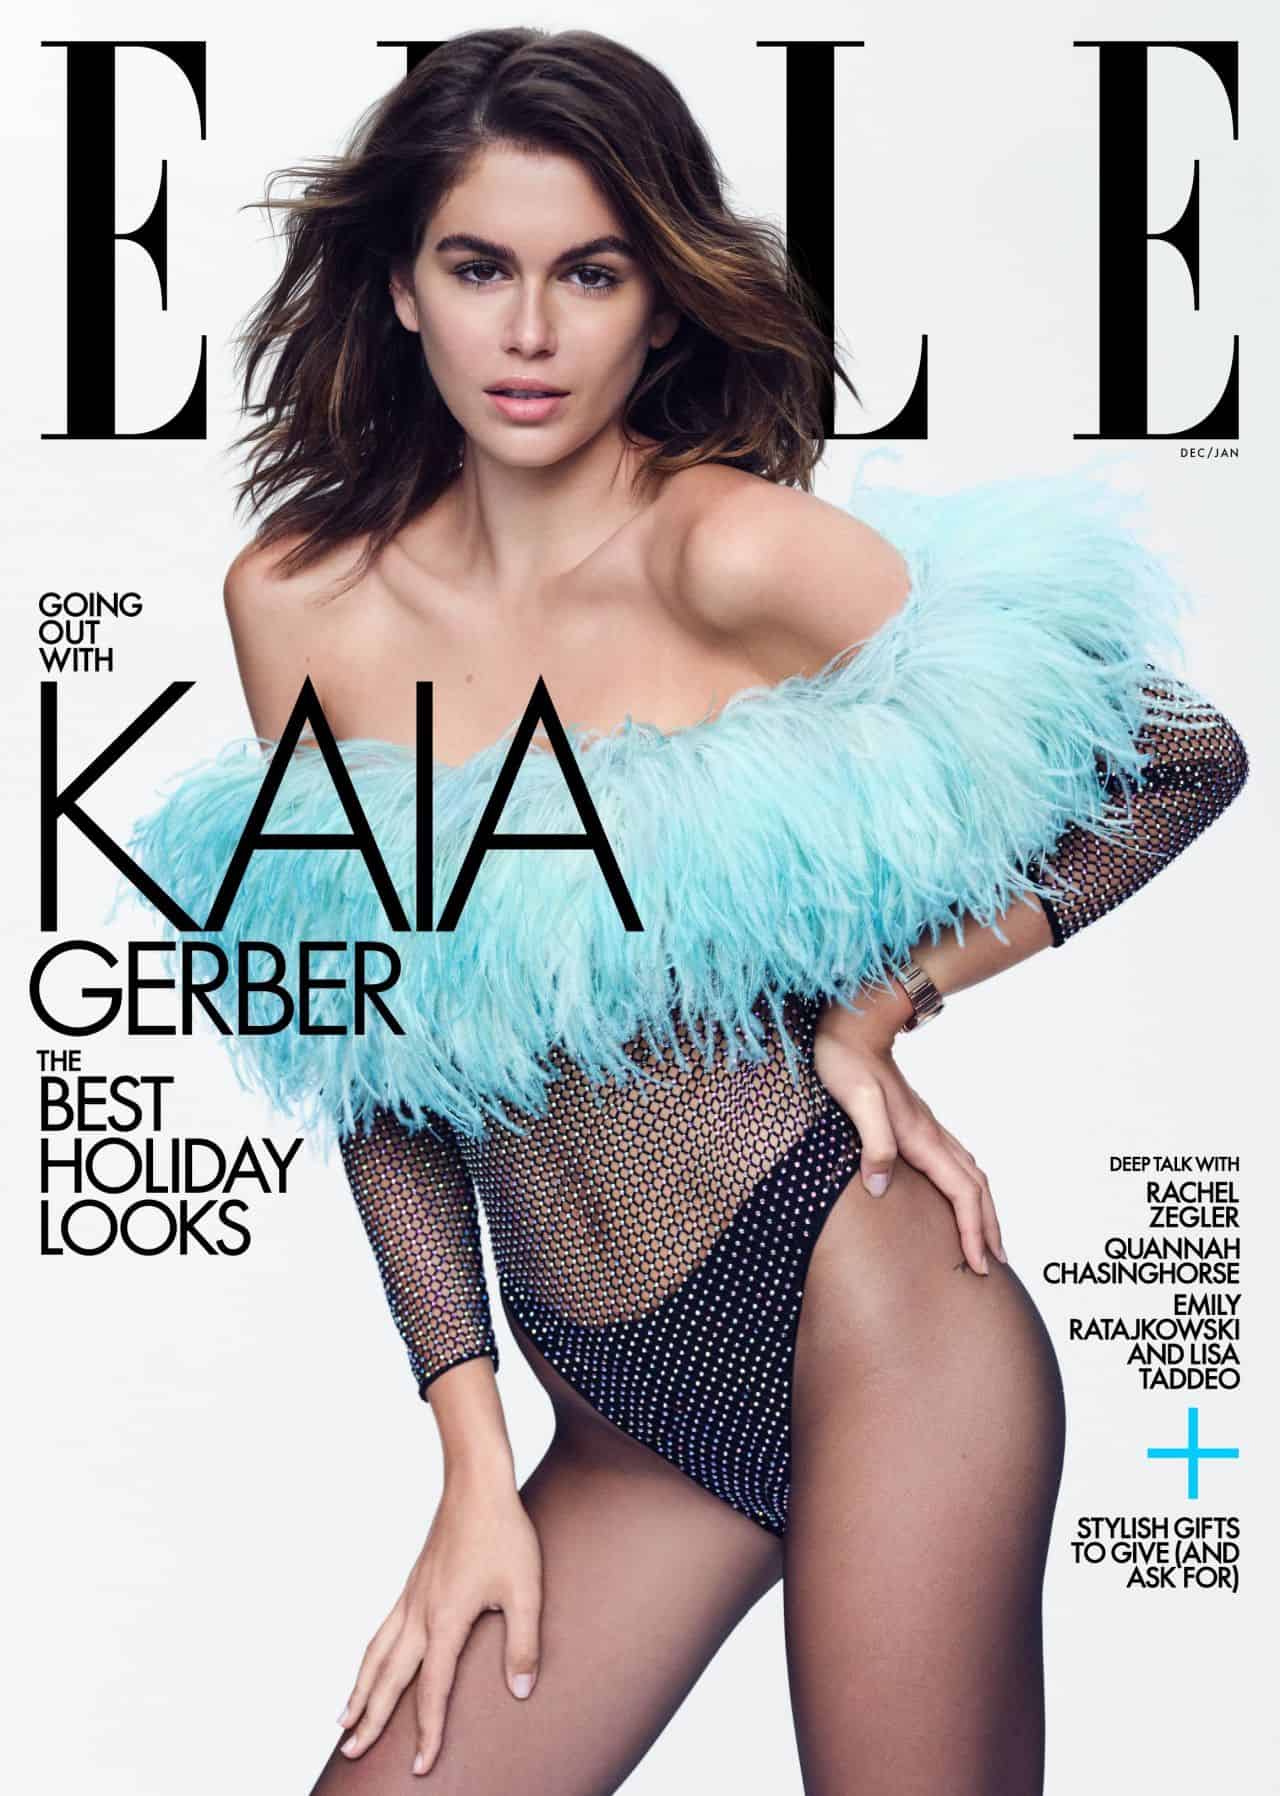 Kaia Gerber is ELLE’s Cover Star for December 2021/January 2022 Issue